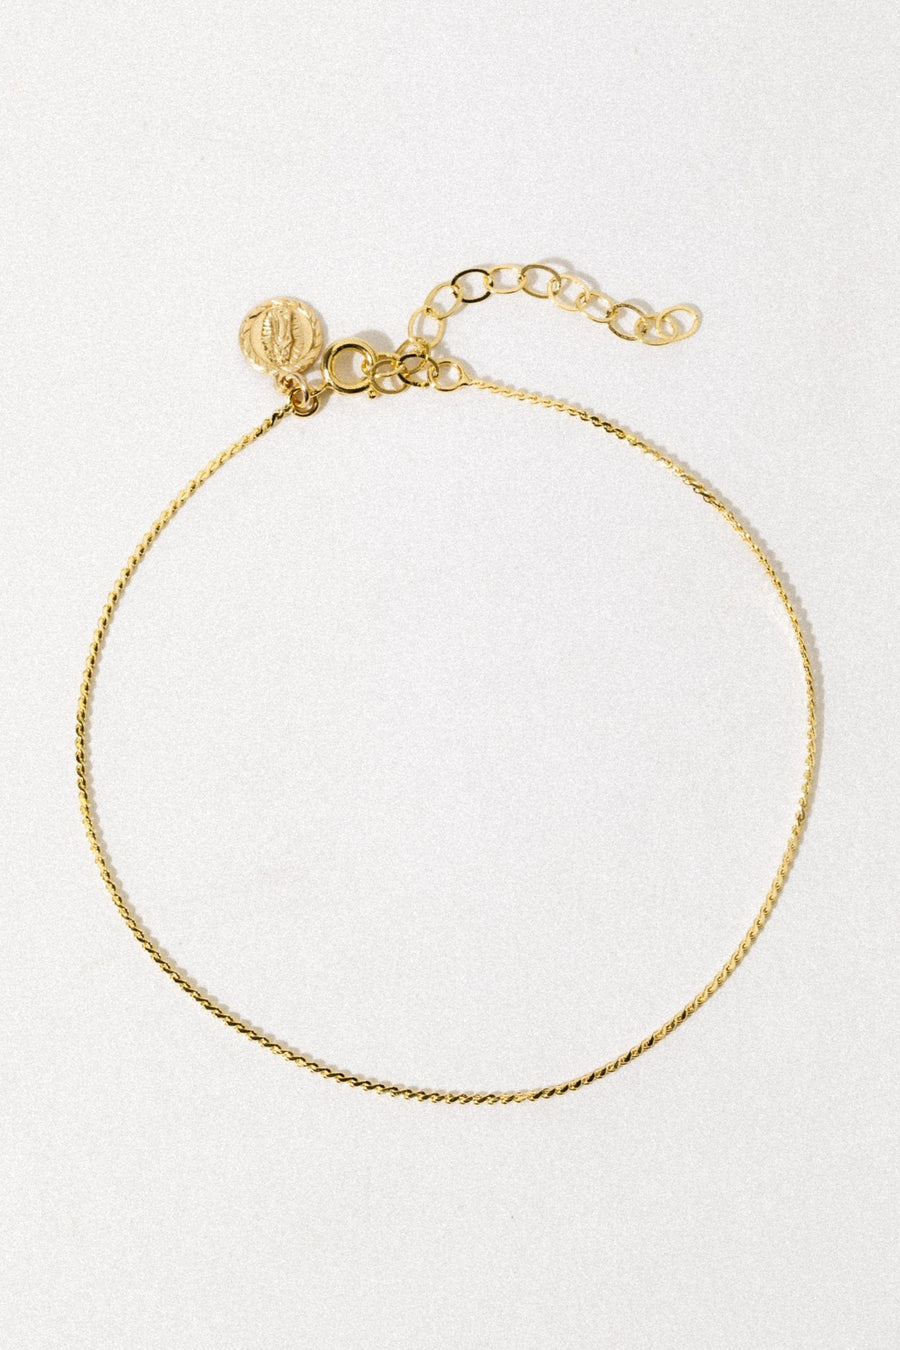 Dona Italia Jewelry Gold Guadalupe Rope Anklet